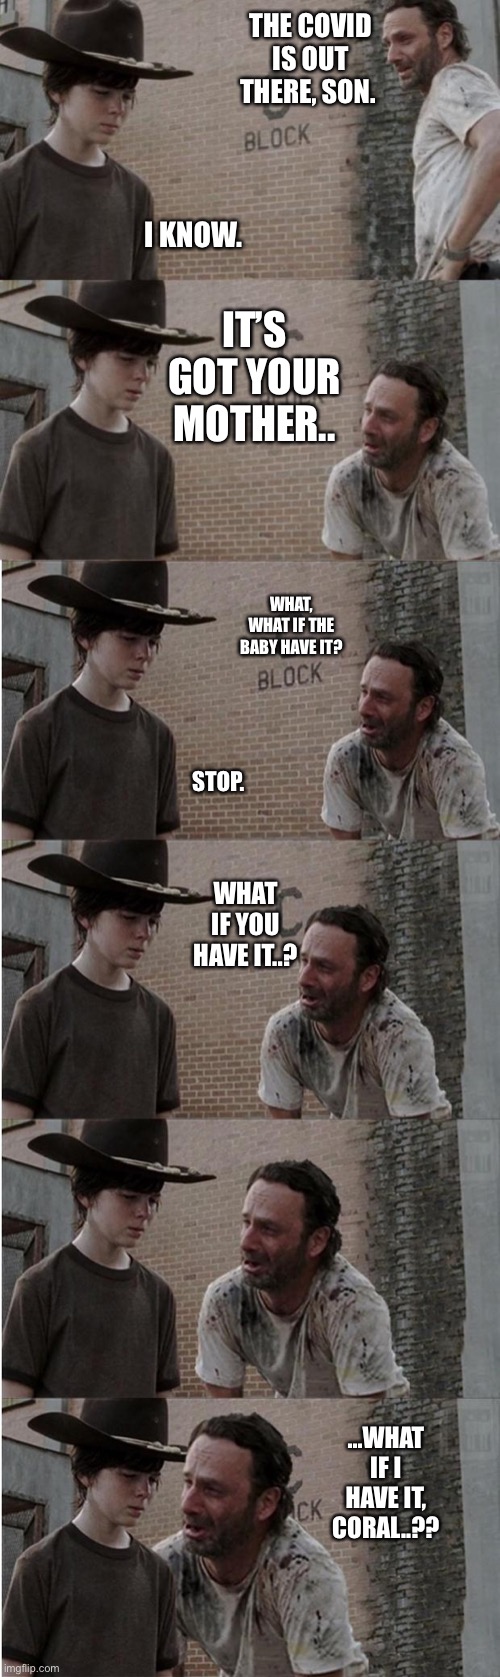 Covid is out there | THE COVID IS OUT THERE, SON. I KNOW. IT’S GOT YOUR MOTHER.. WHAT, WHAT IF THE BABY HAVE IT? STOP. WHAT IF YOU HAVE IT..? ...WHAT IF I HAVE IT, CORAL..?? | image tagged in memes,rick and carl longer,covid-19 | made w/ Imgflip meme maker